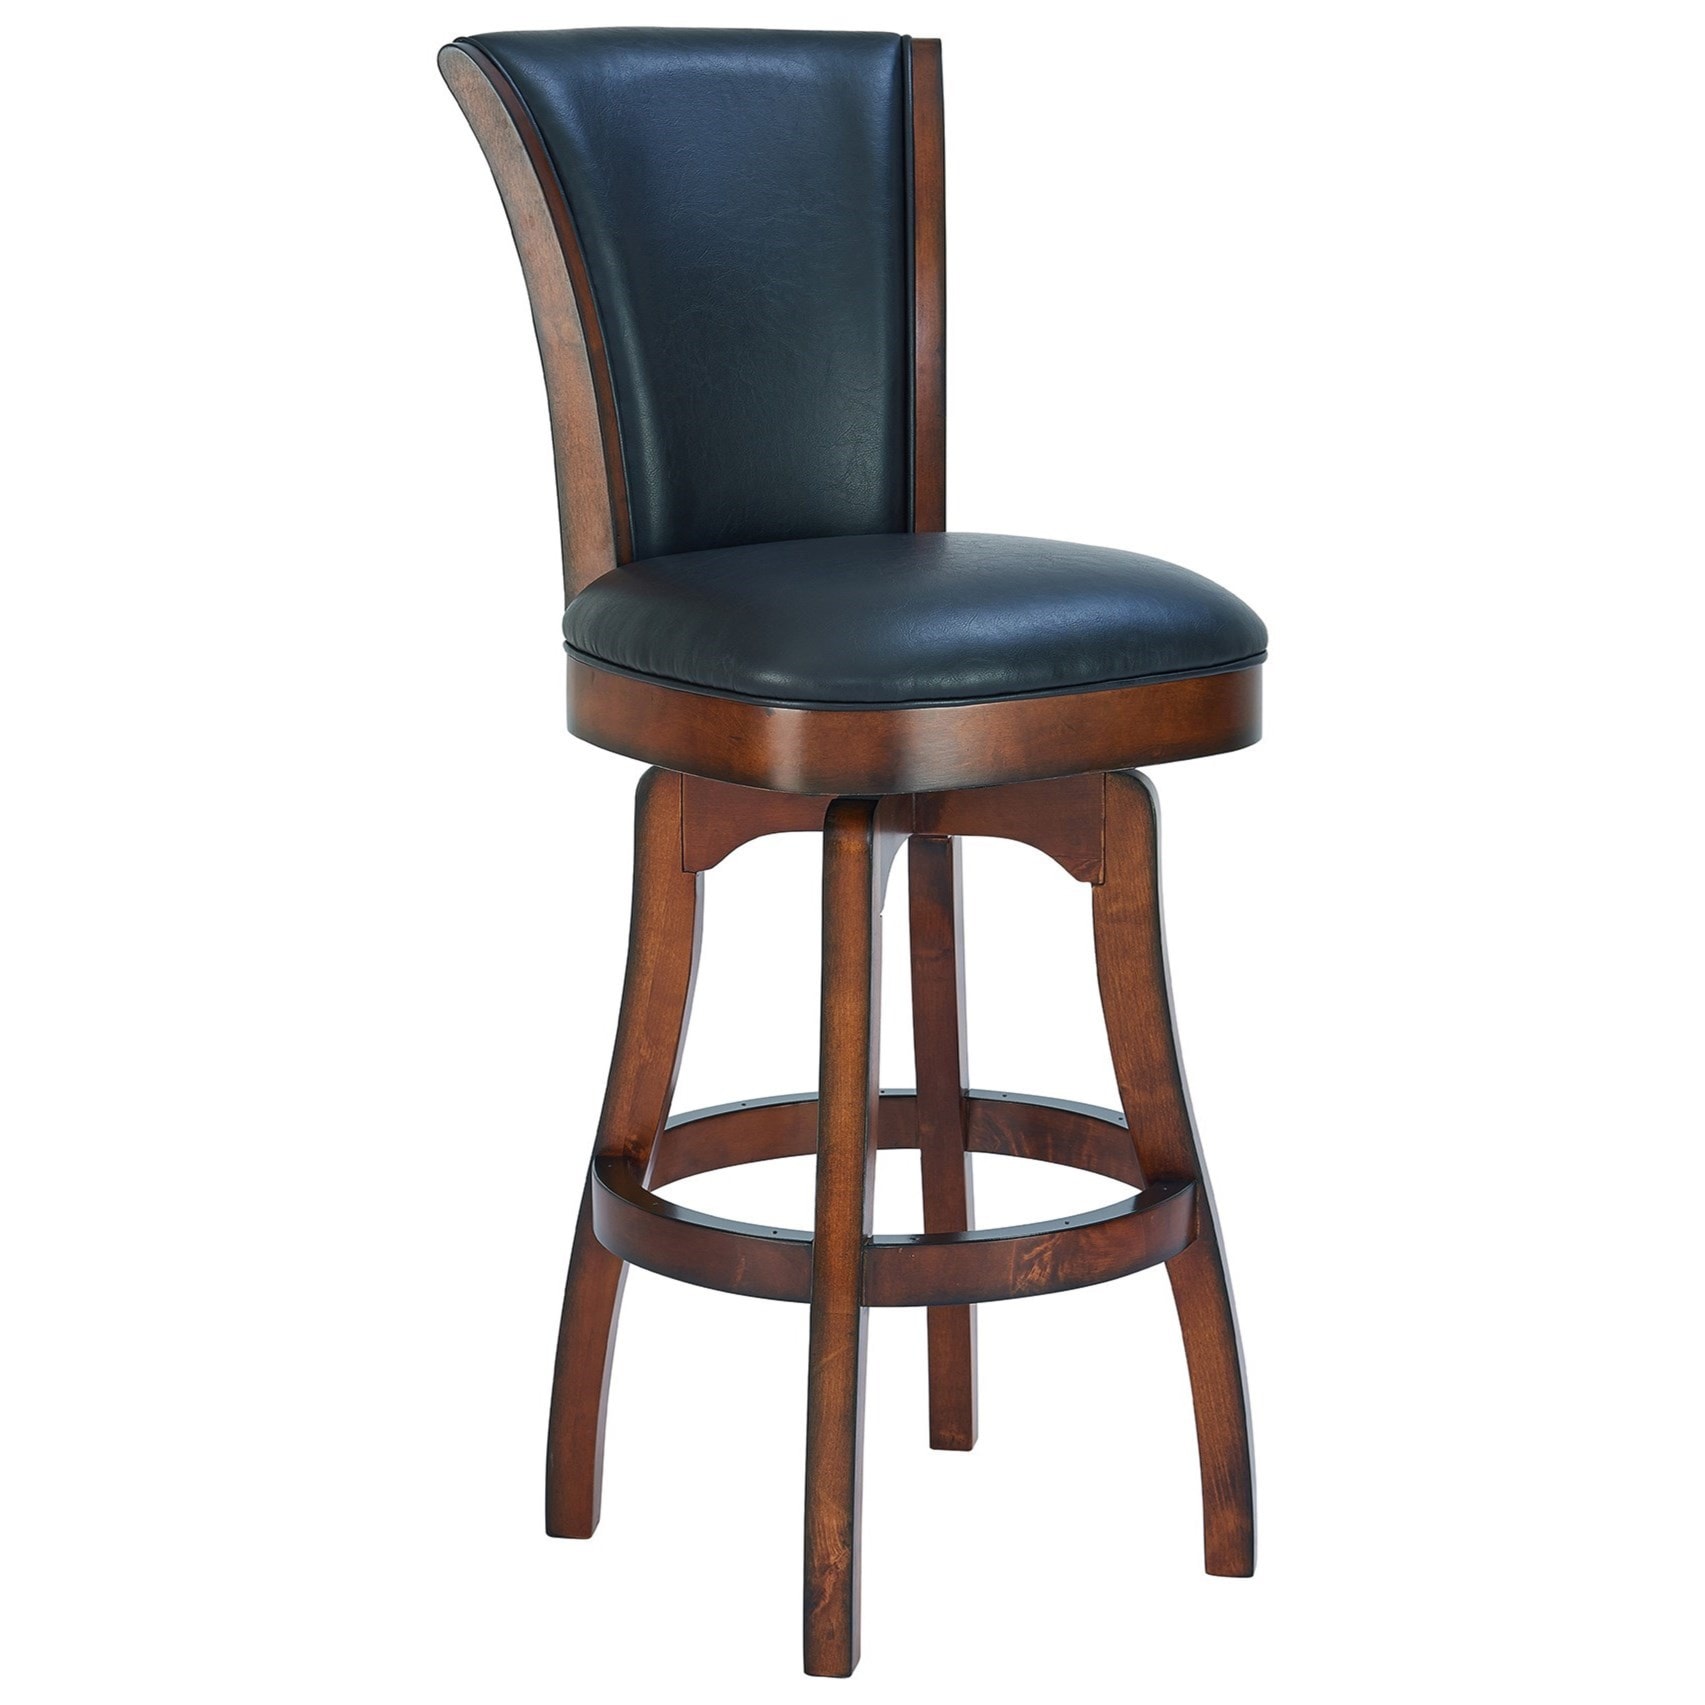 Armen Living LCRABASIKACH26 Raleigh 26 Counter Height Swivel Barstool in Kahlua Faux Leather and Chestnut Wood Finish 